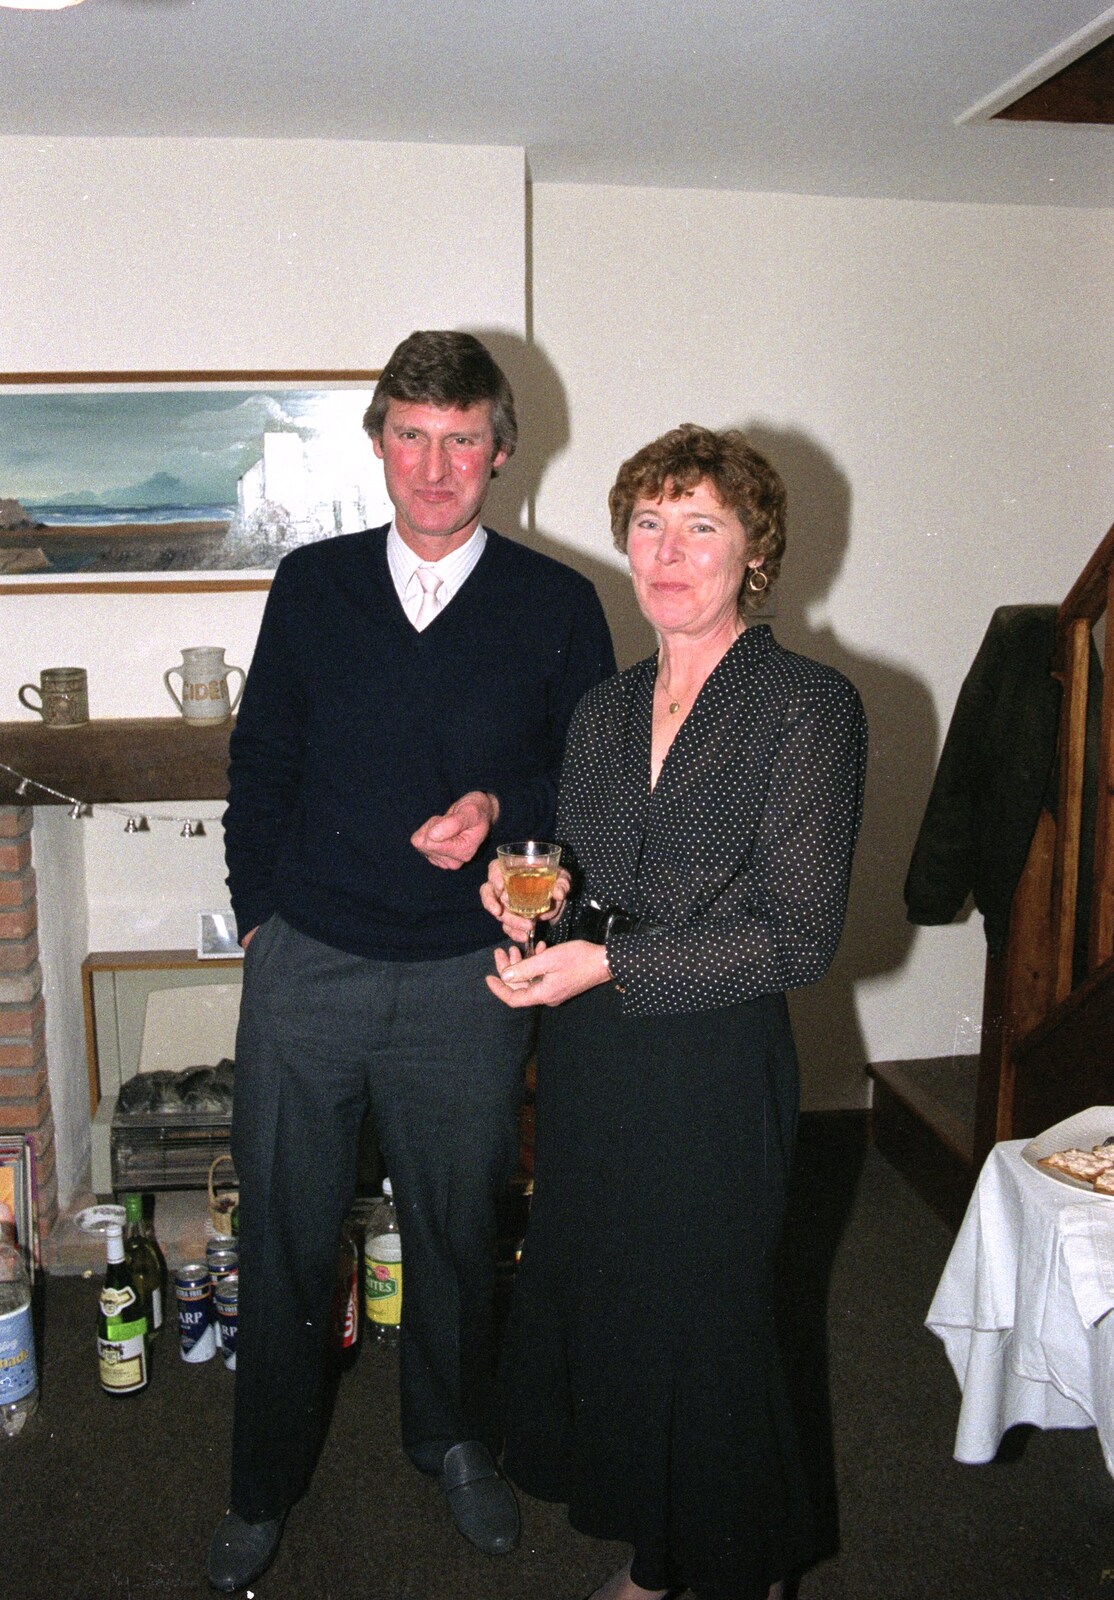 Geoff and Brenda from Pre-Christmas Dinner and a Next-Door Do, Stuston, Suffolk - 20th December 1990